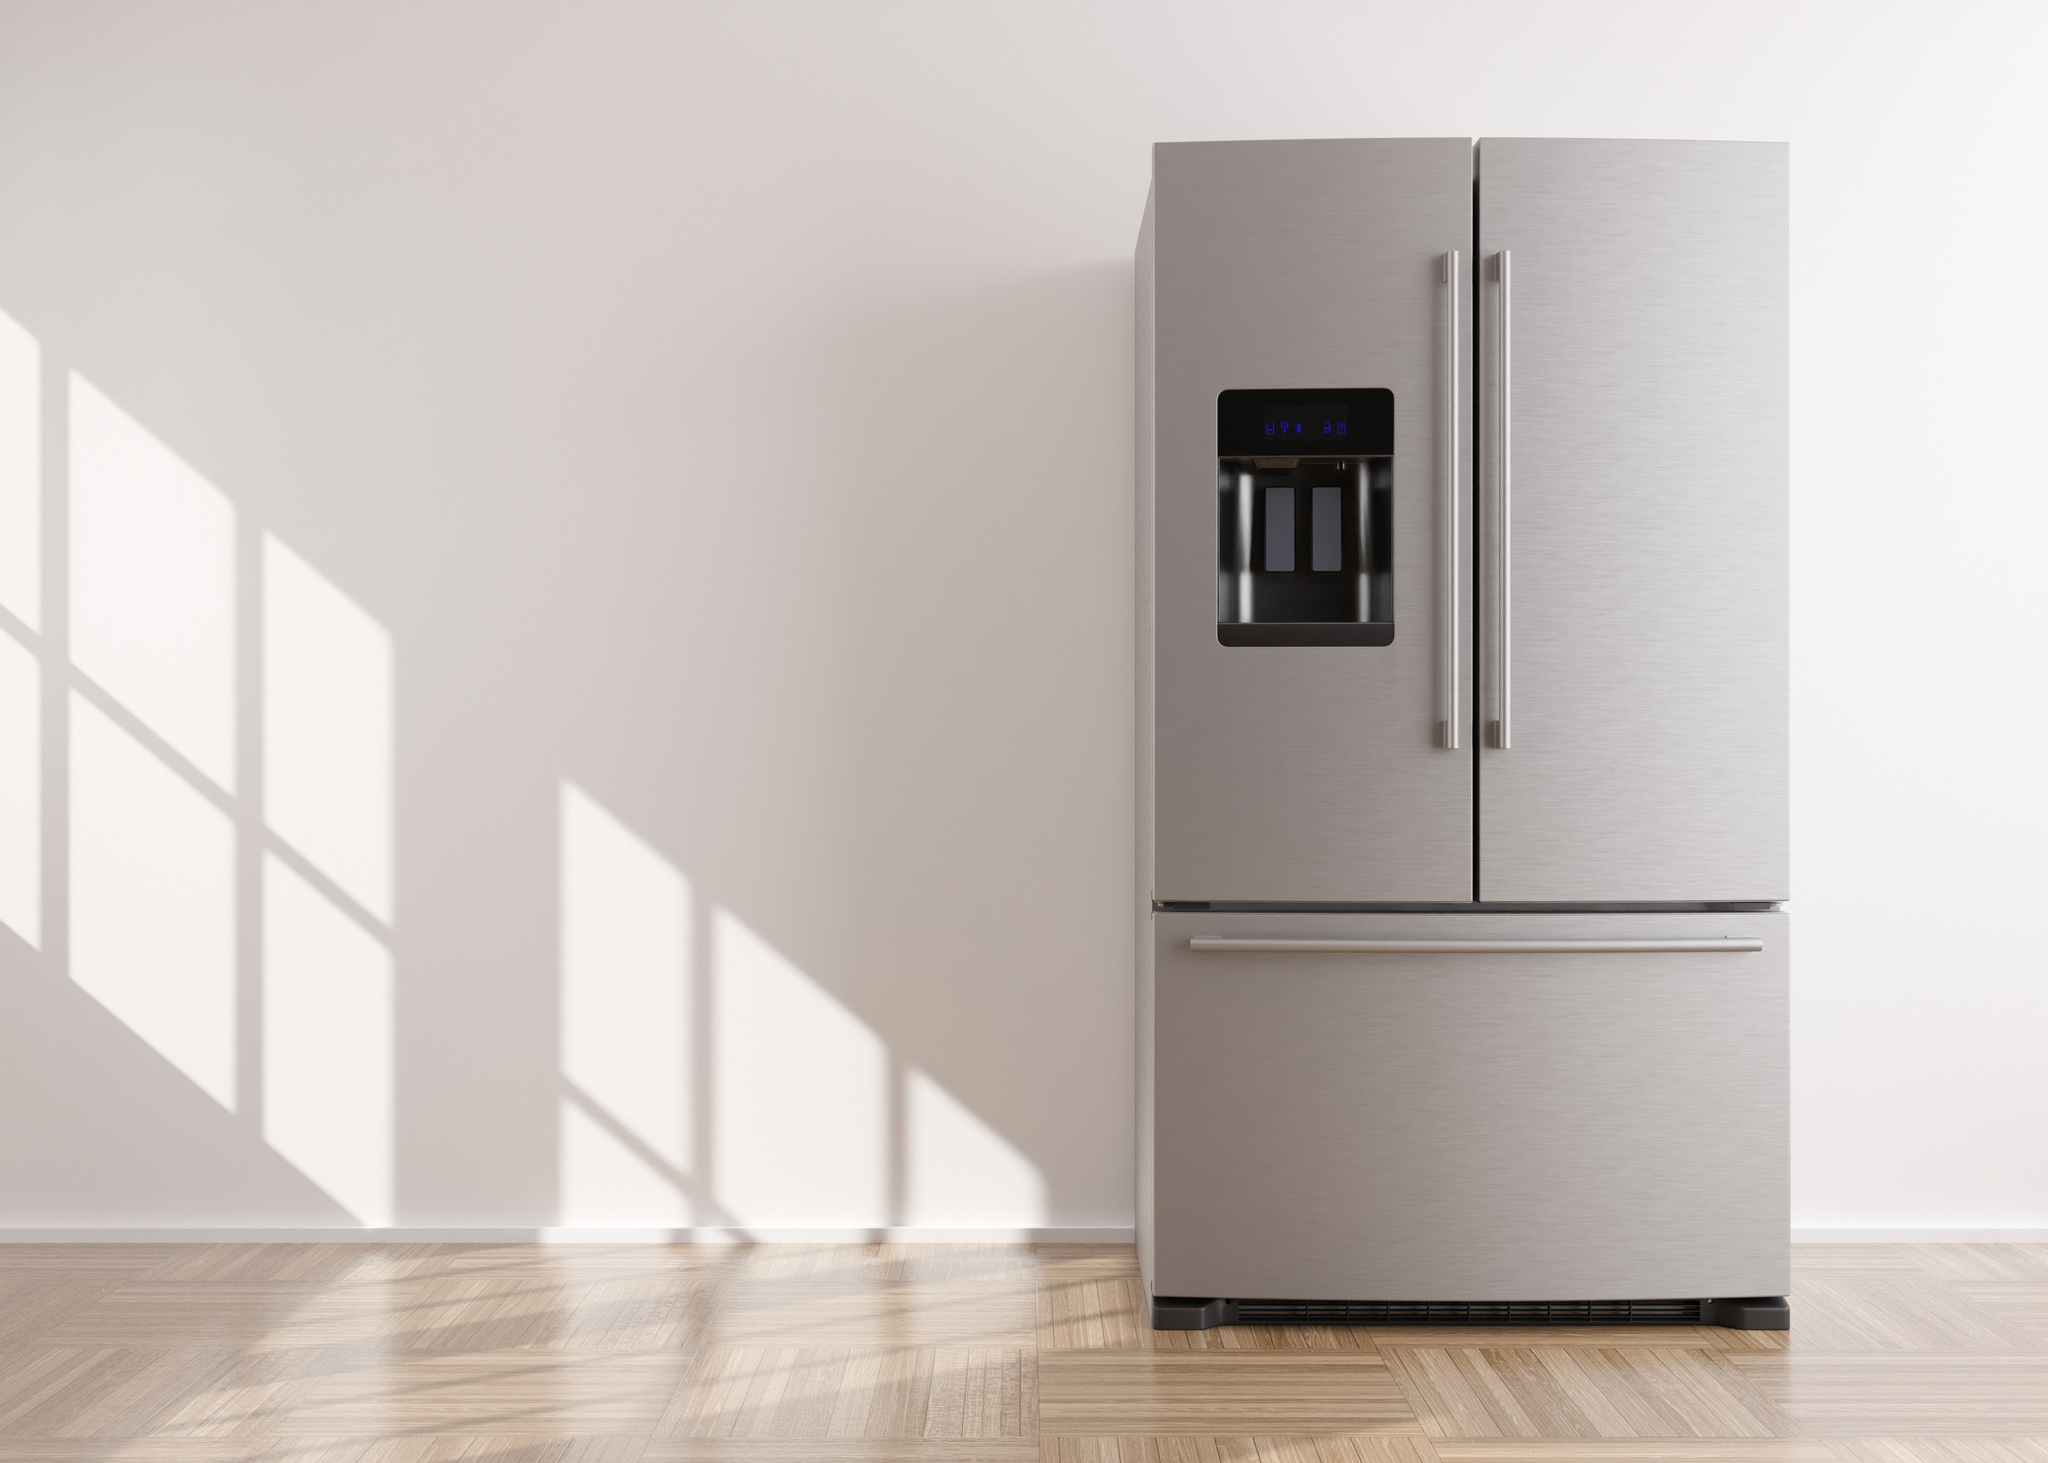 Why Is Your Freezer Cold But Fridge Warm?